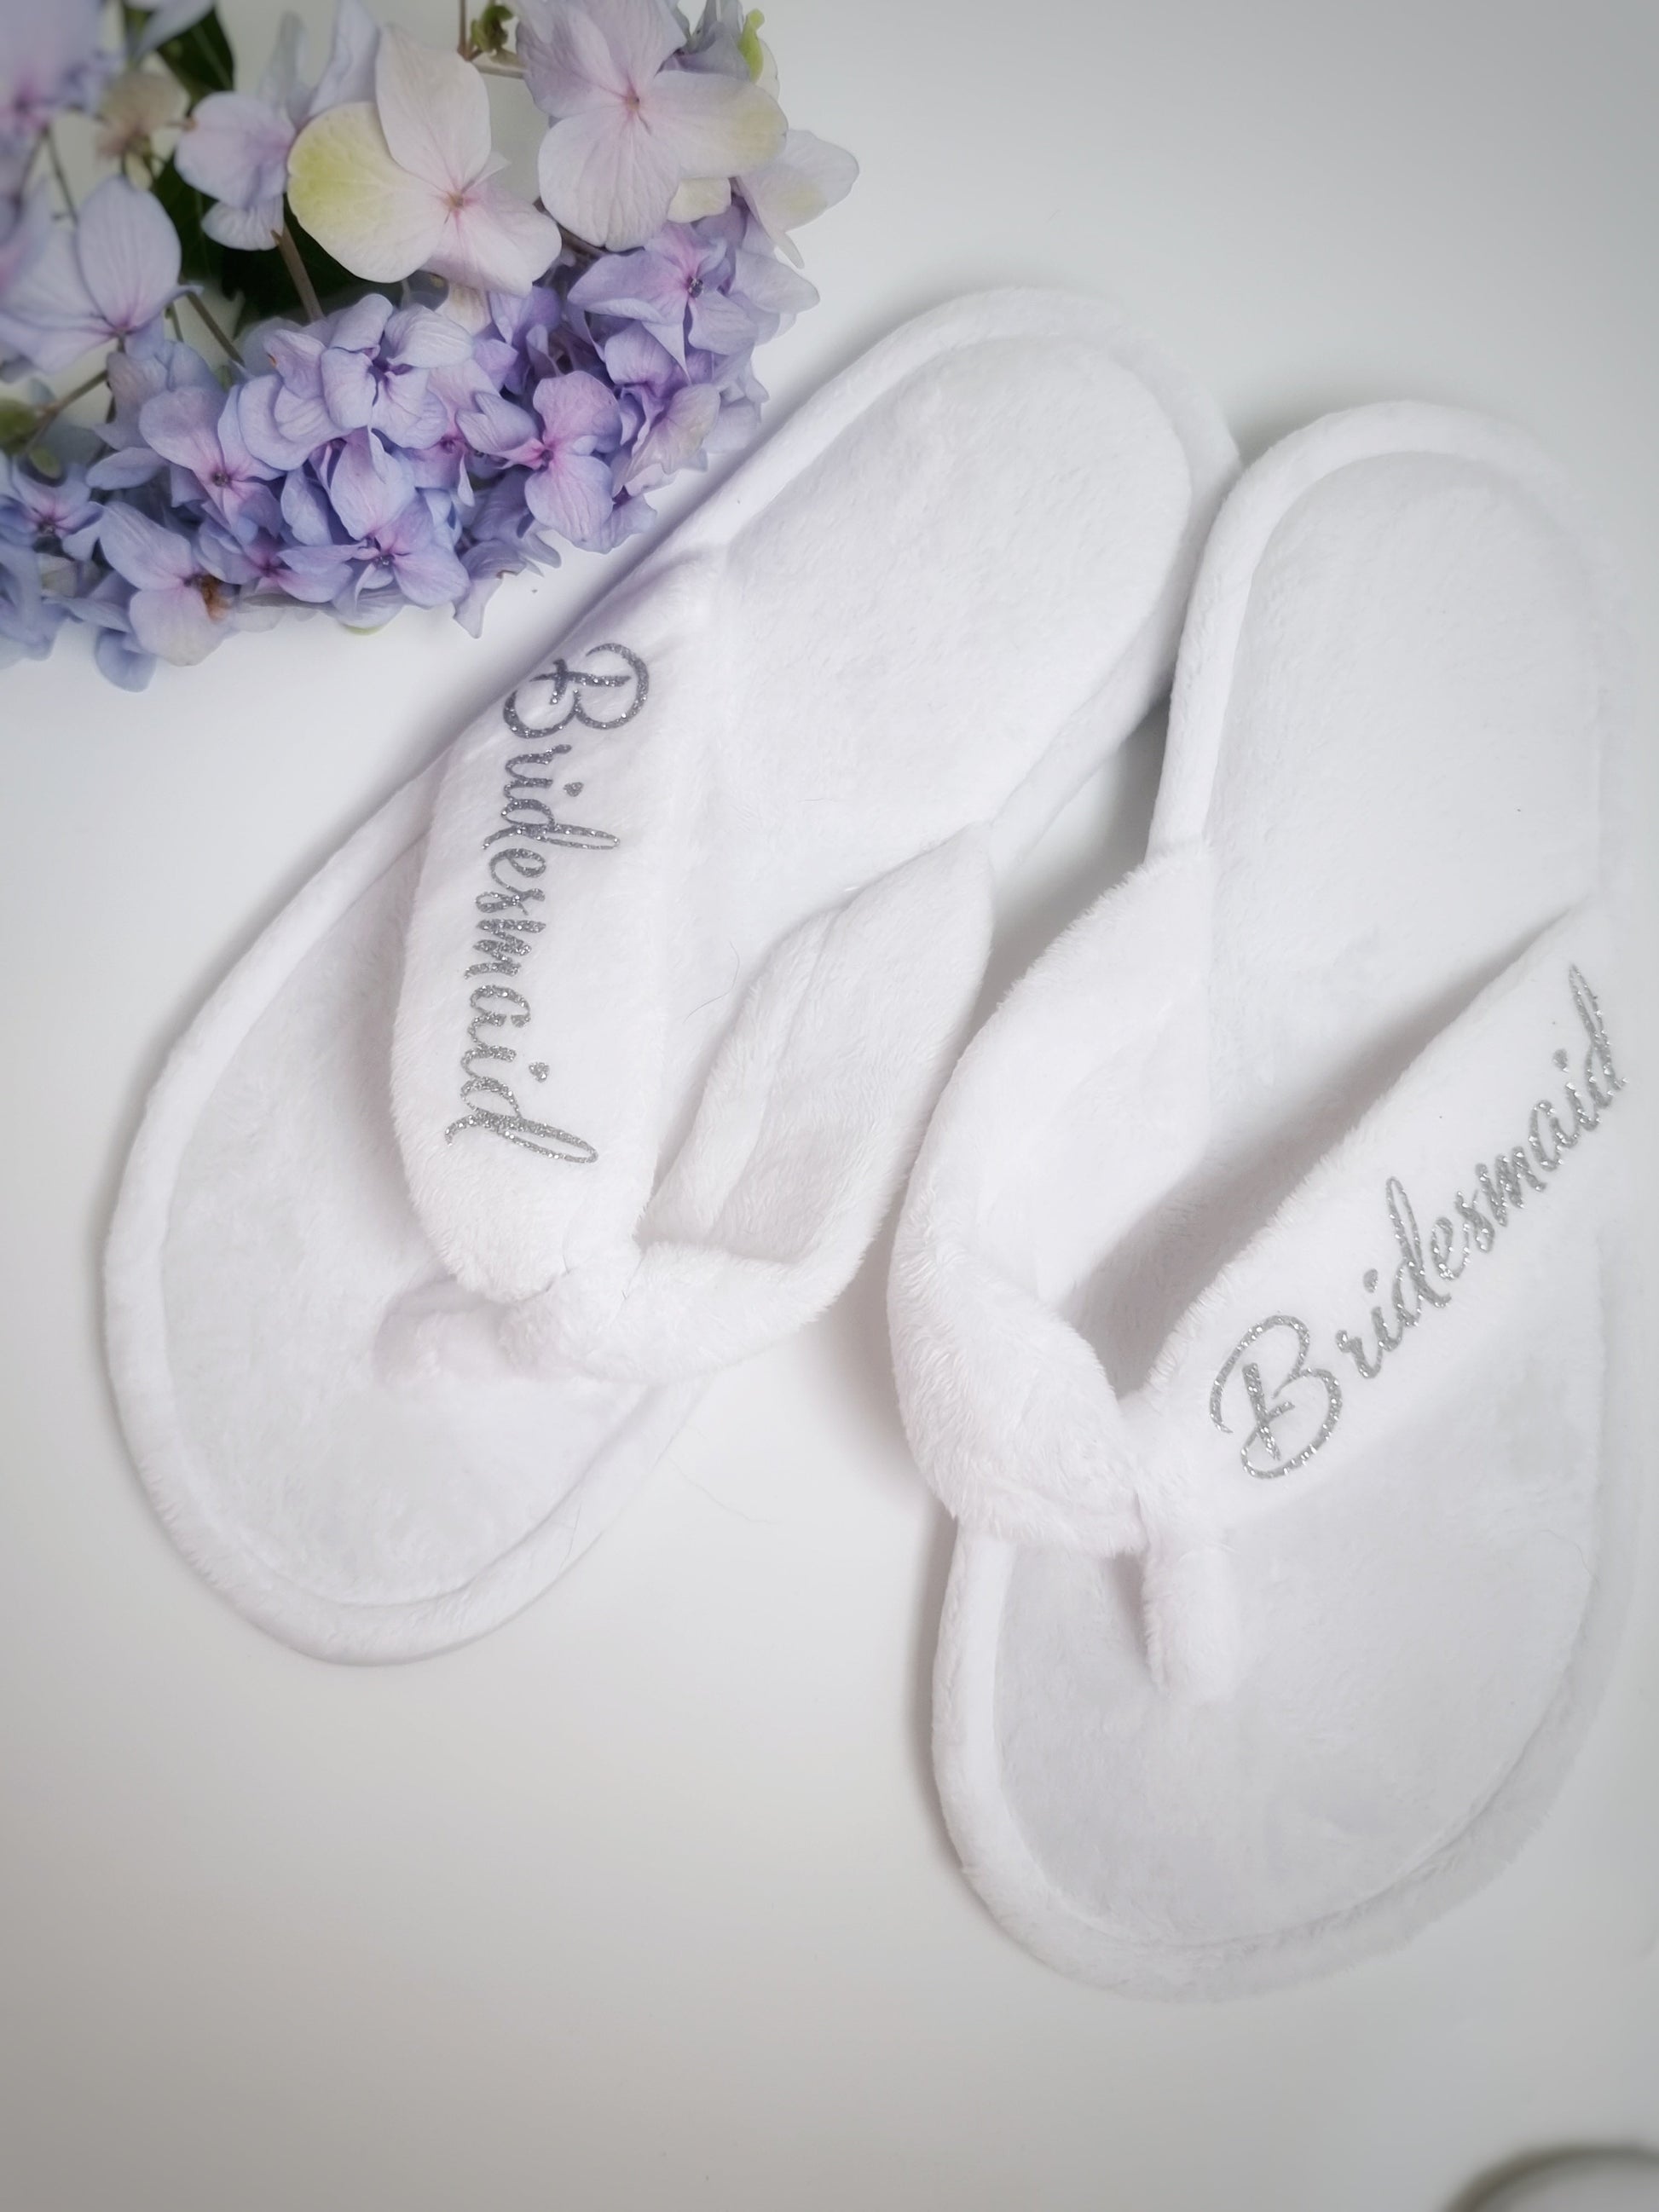 Bridal party thong towelling slippers - Smooches Bridal